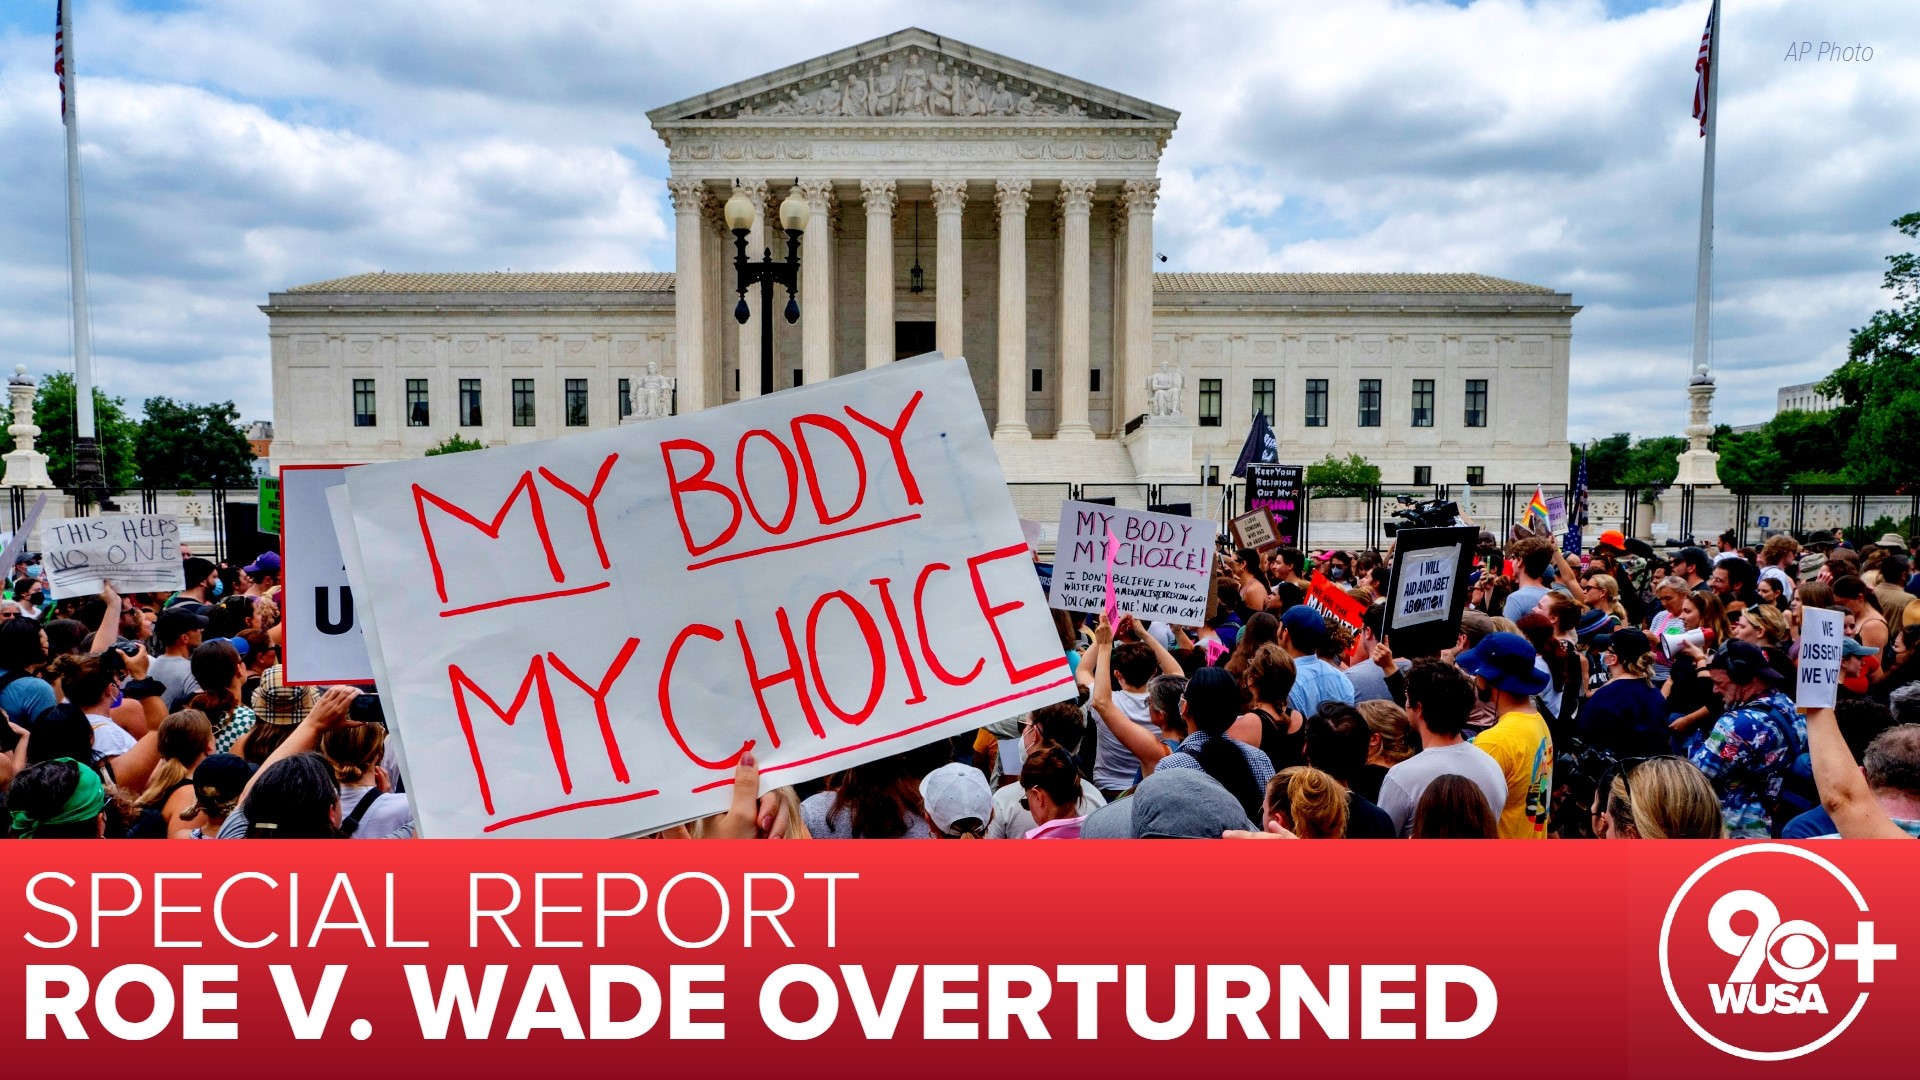 Reports from the US Supreme Court in the hours after the decision that overturns Roe v. Wade, including expert legal analysis.